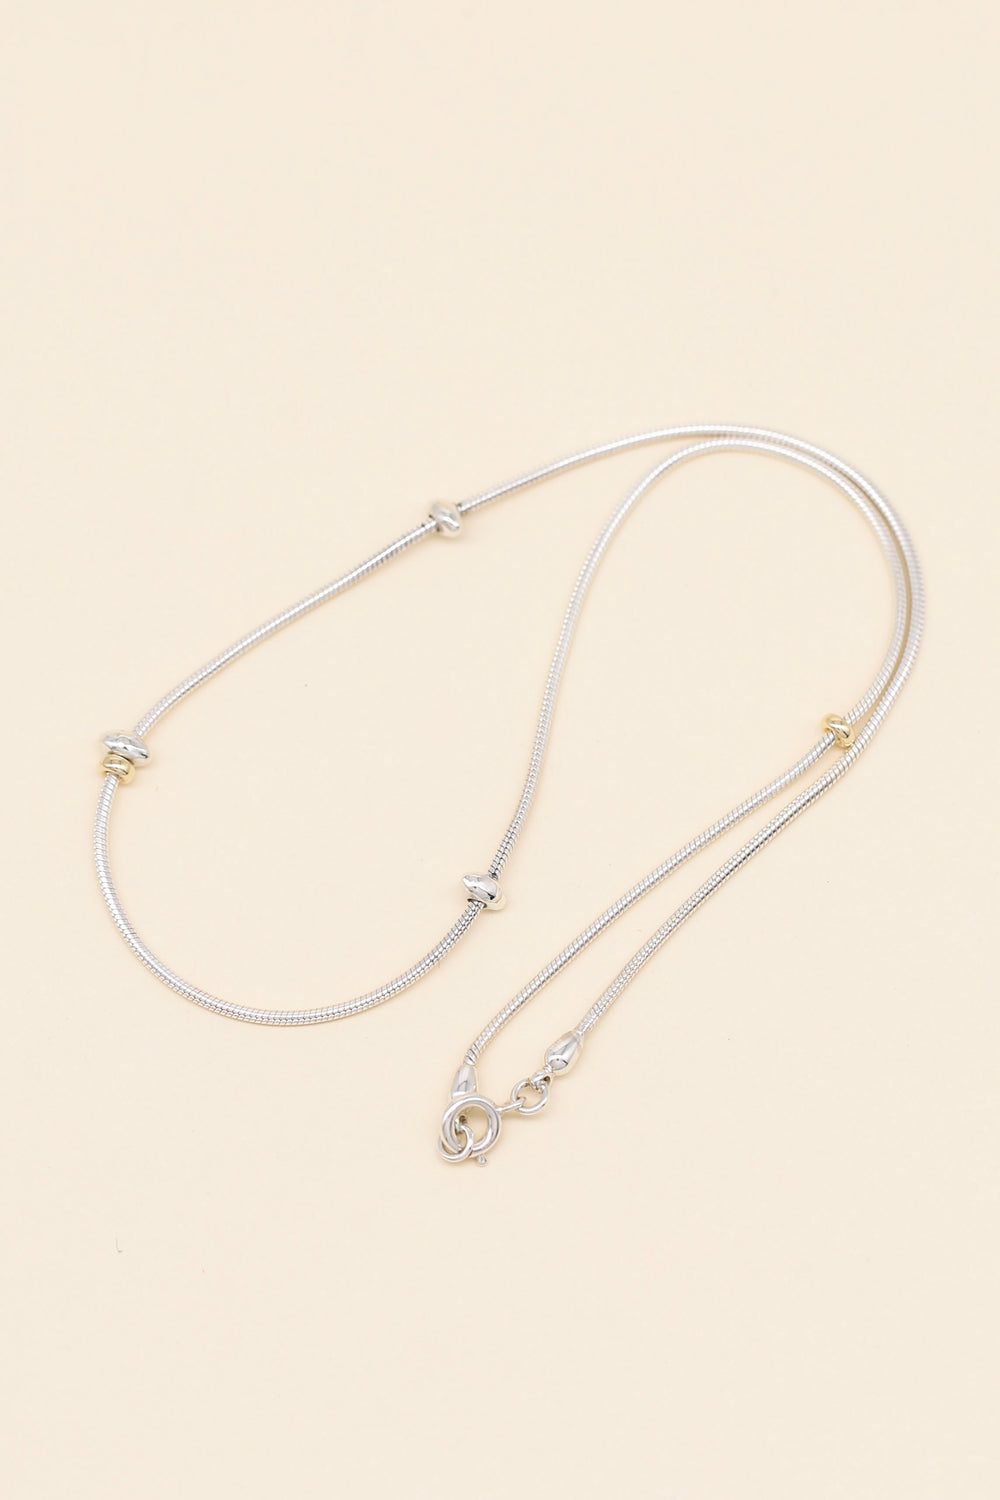 Sprout / SP-N02 / NECKLESS